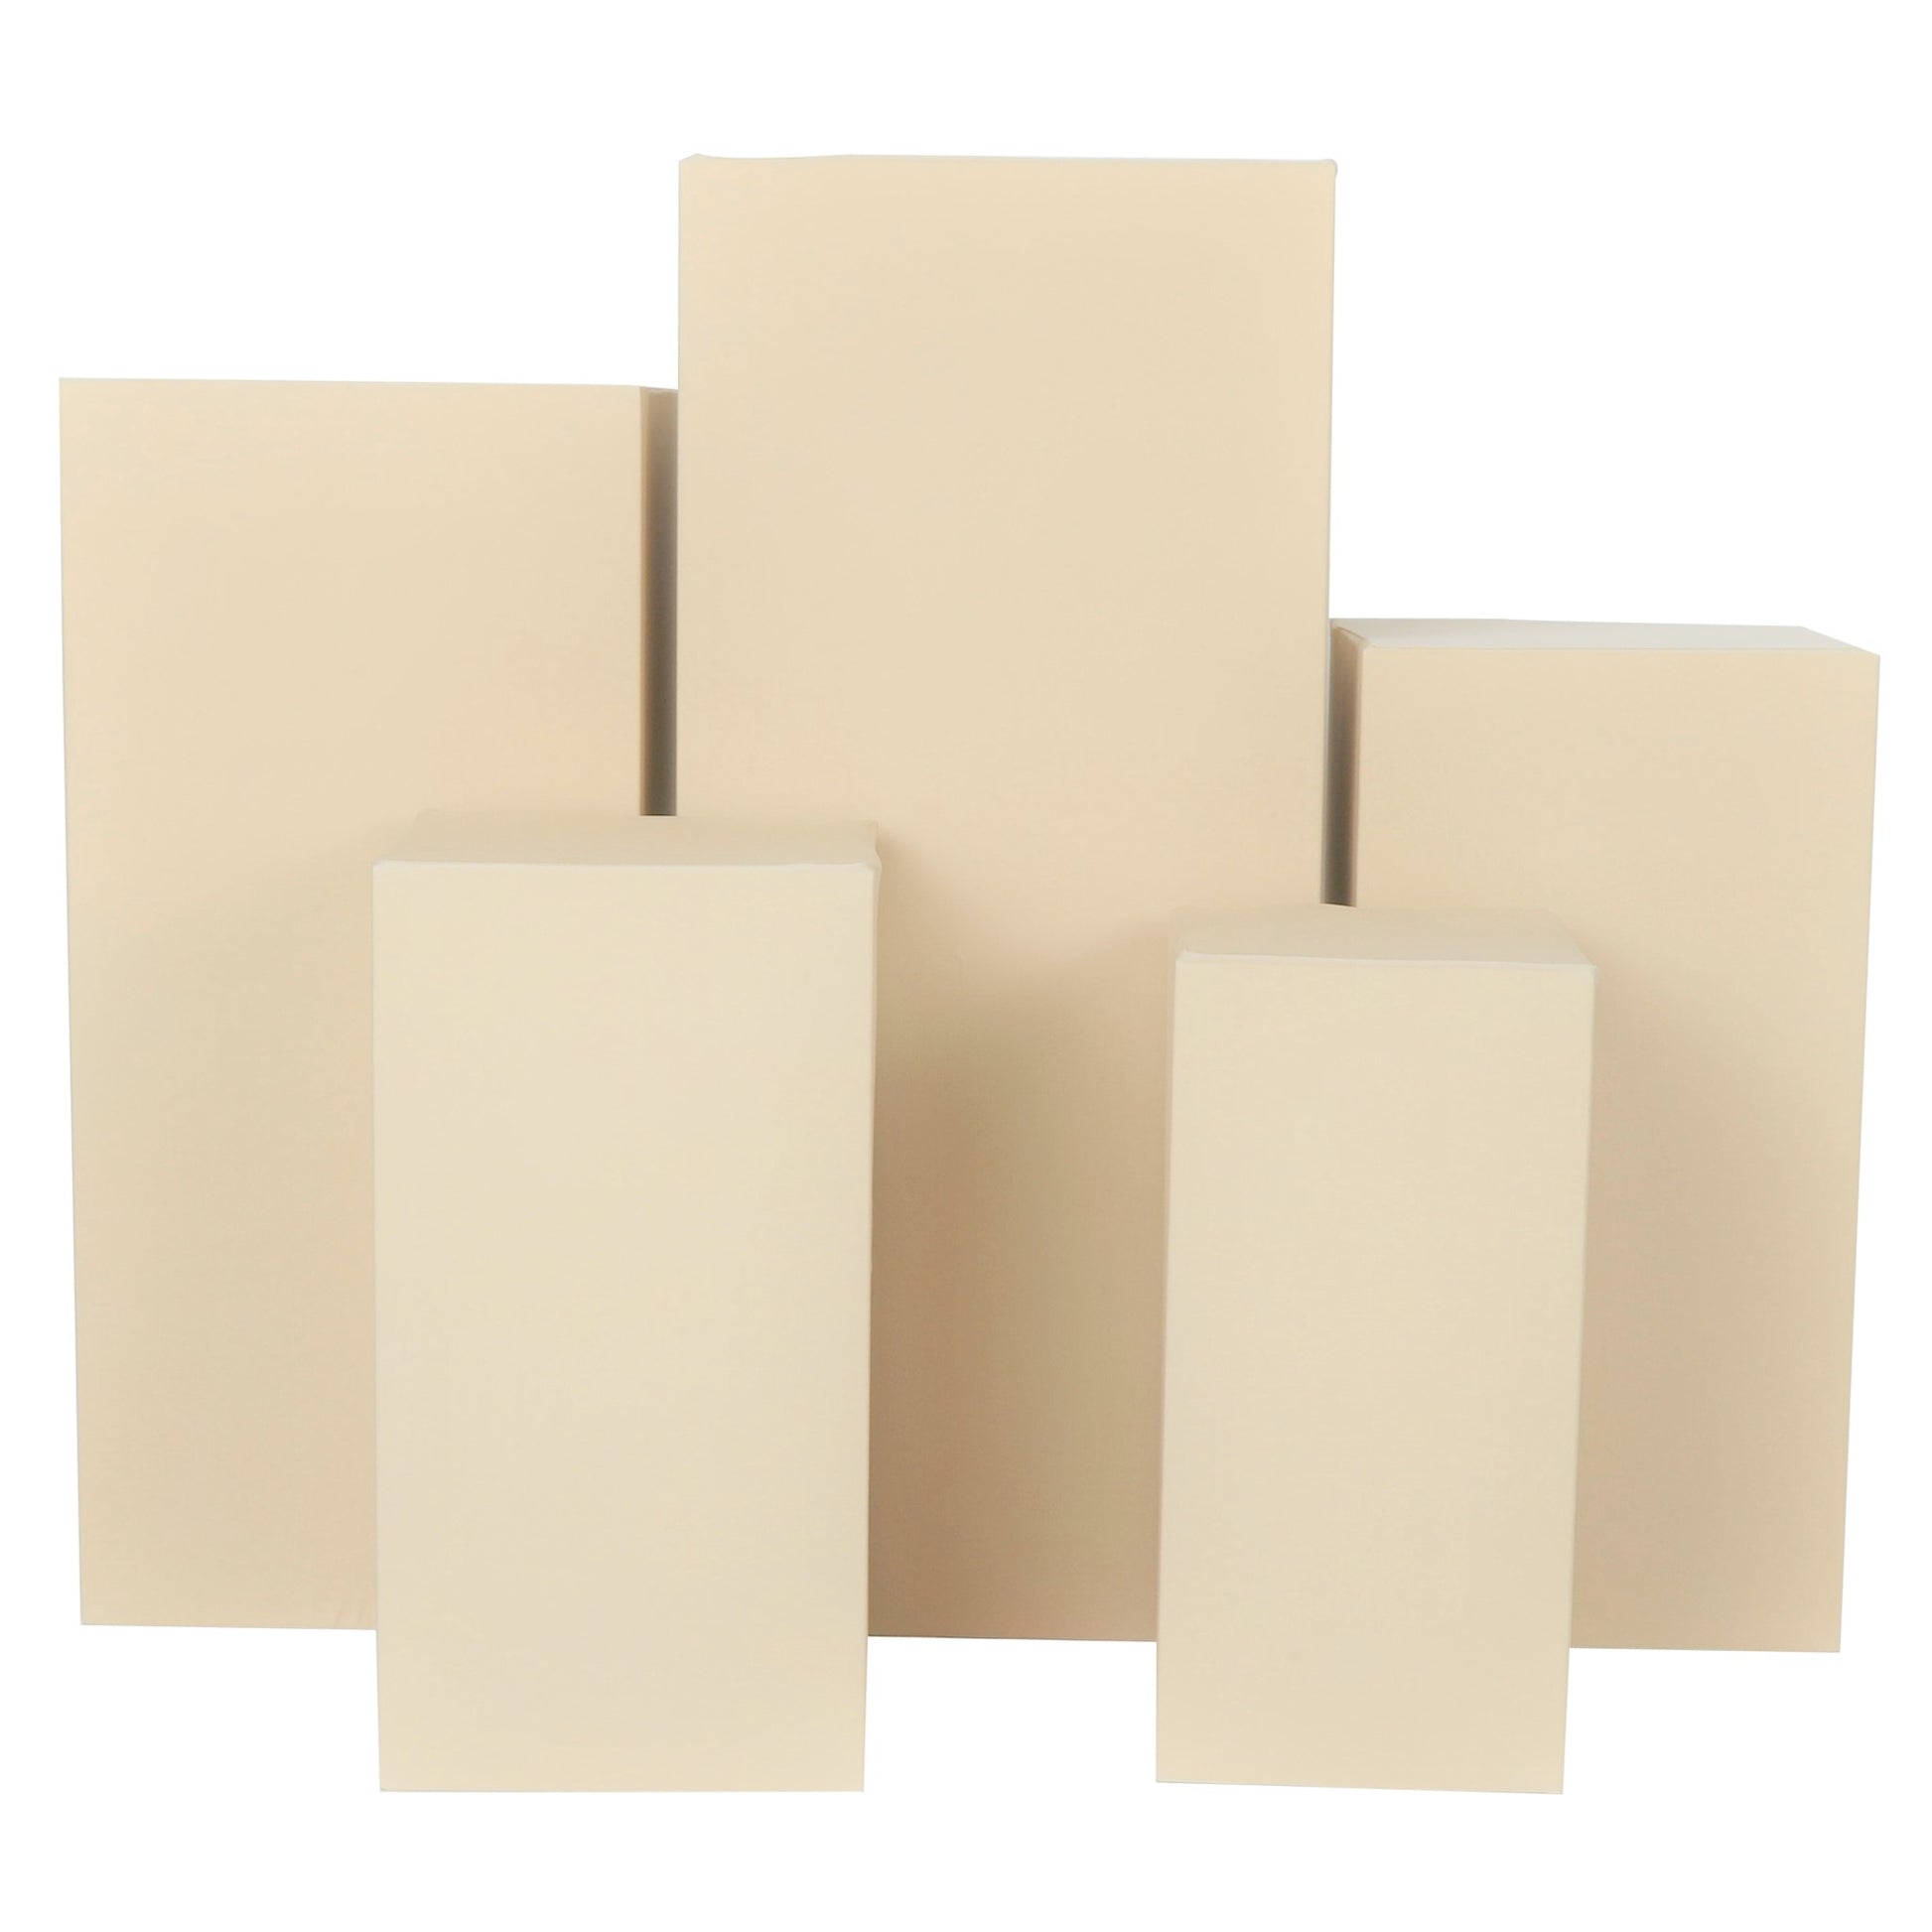 Spandex Covers for Square Metal Pillar Pedestal Stands 5 pcs/set - Champagne